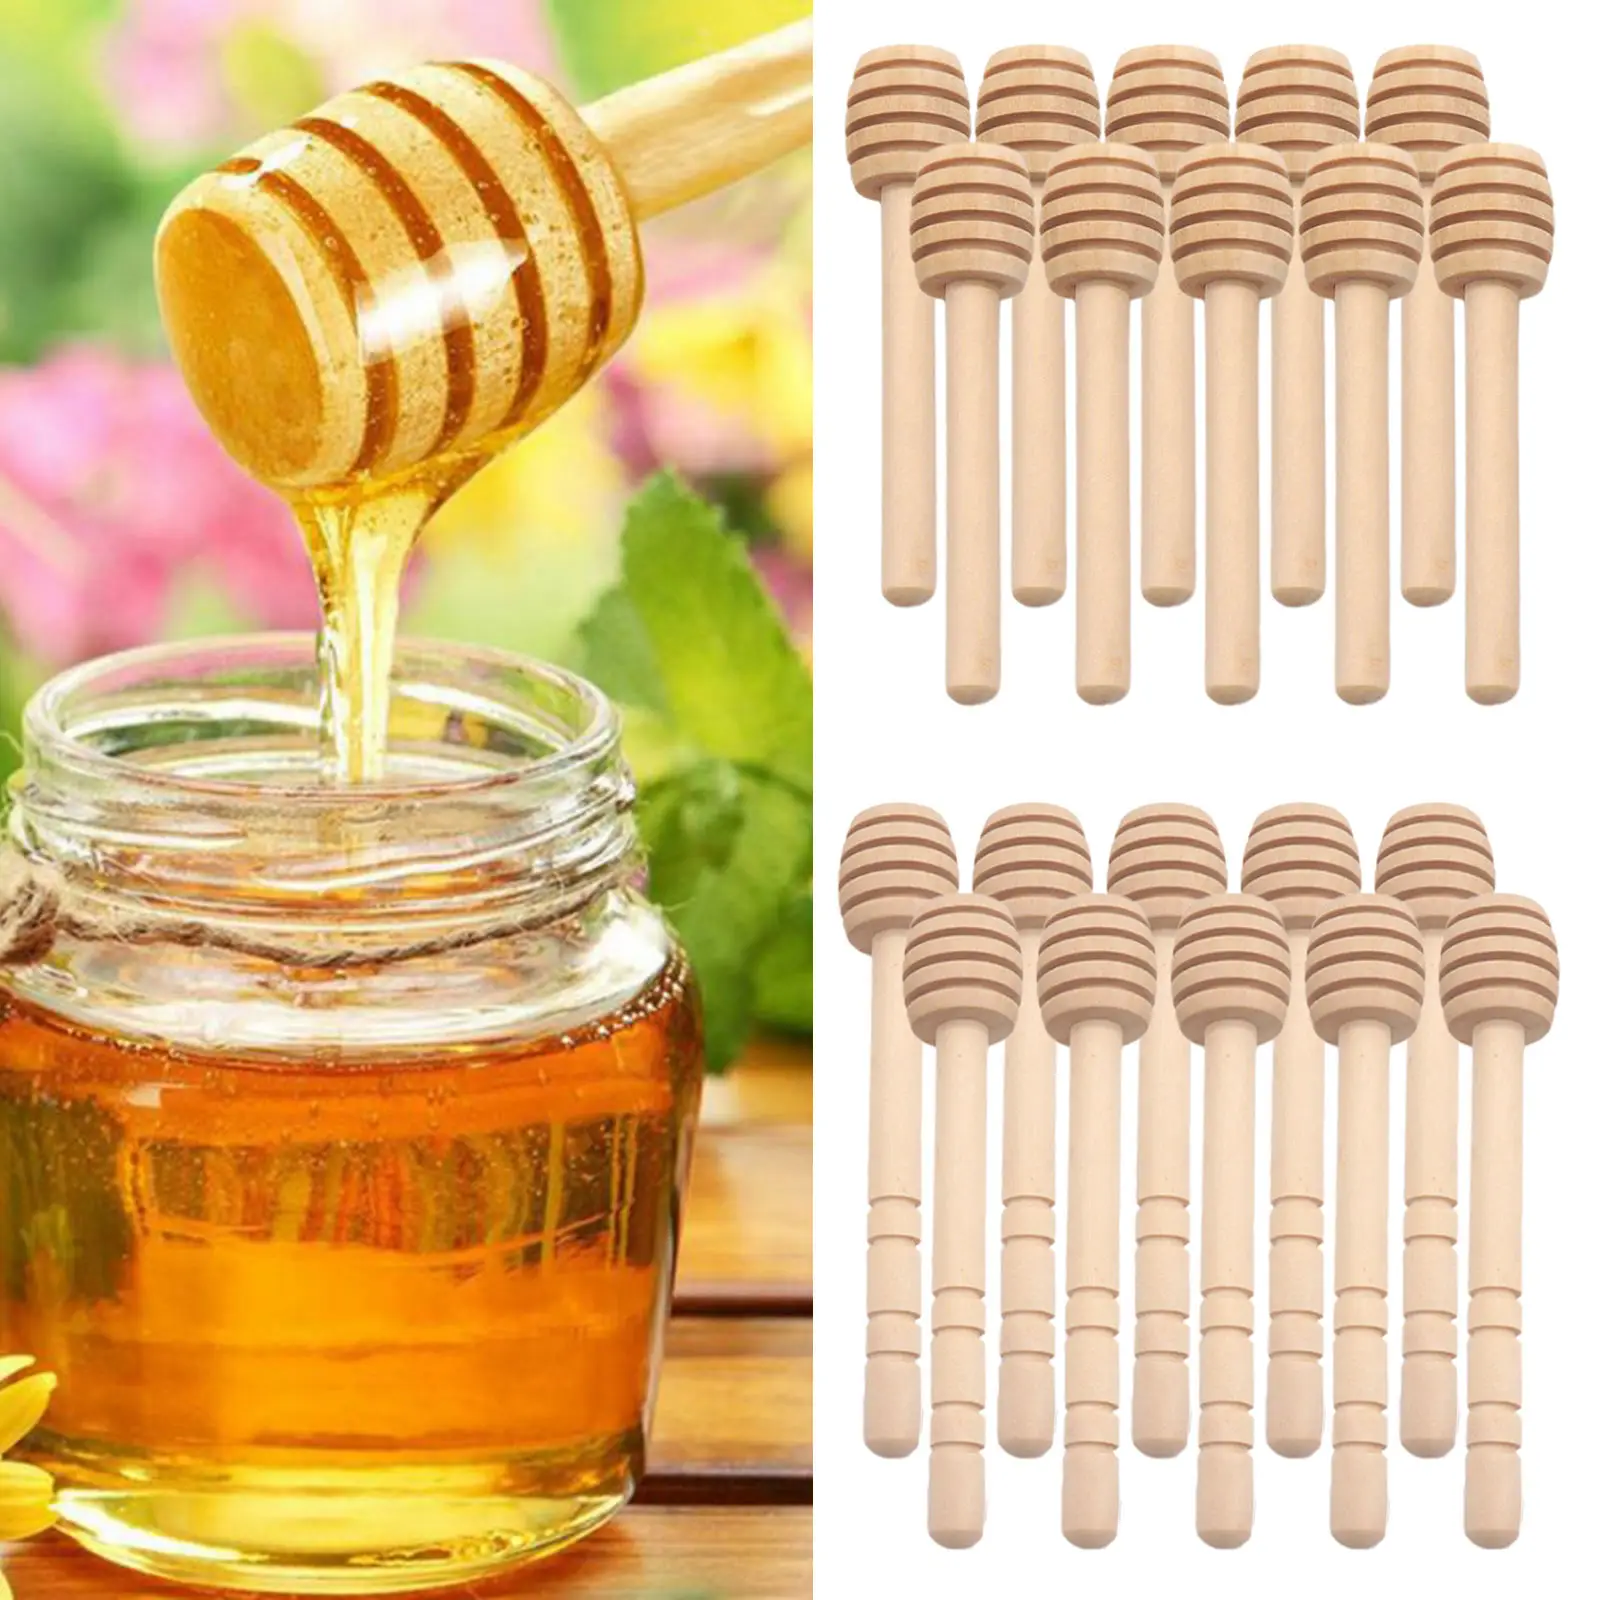 3 inch Mini Wooden Honeycomb Stick 24 Pcs Honey Dipper Sticks Small Honey Spoons Stirrer Stick for Honey Jar Dispense Drizzle Honey and Wedding Party Favors Gift 